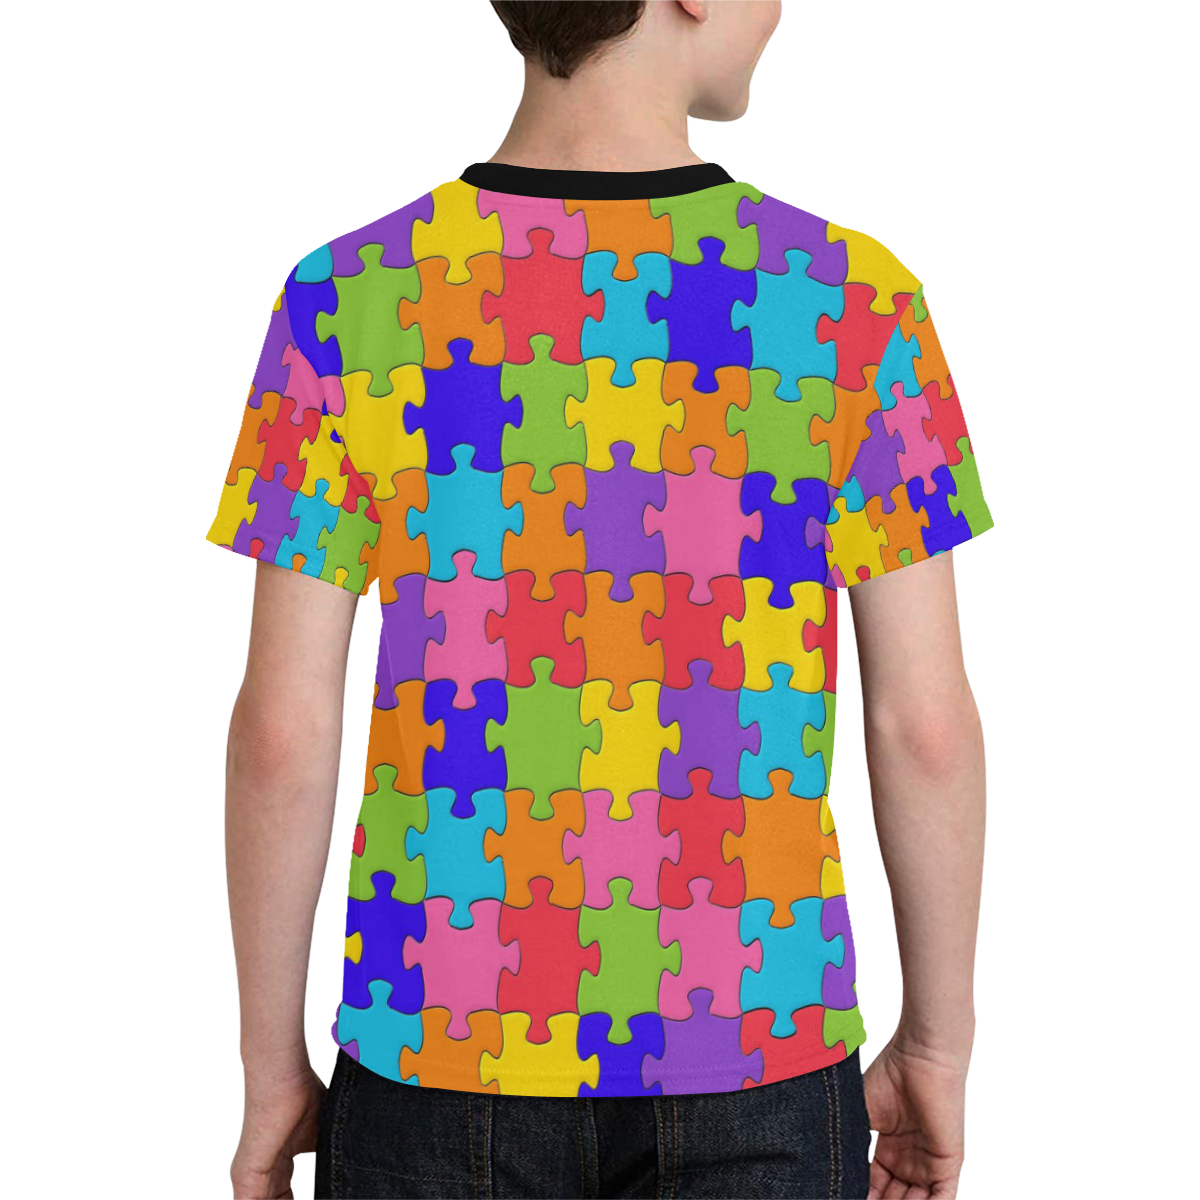 Multicolored Jigsaw Puzzle Kids' All Over Print T-shirt (Model T65)